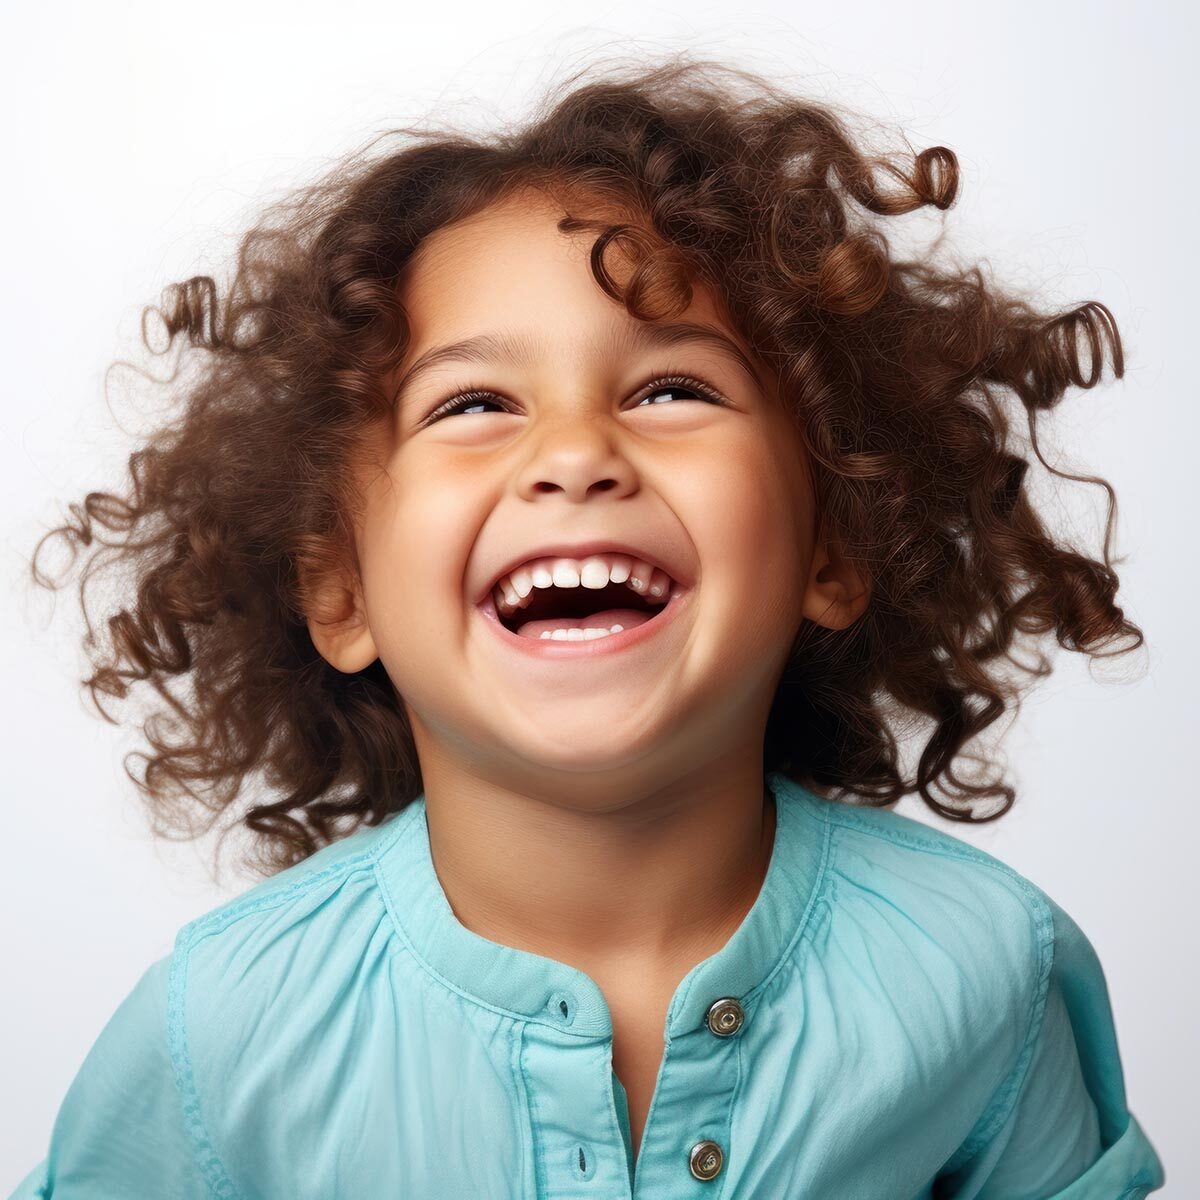 A joyful young girl with curly hair bursts into laughter, radiating happiness and positivity.